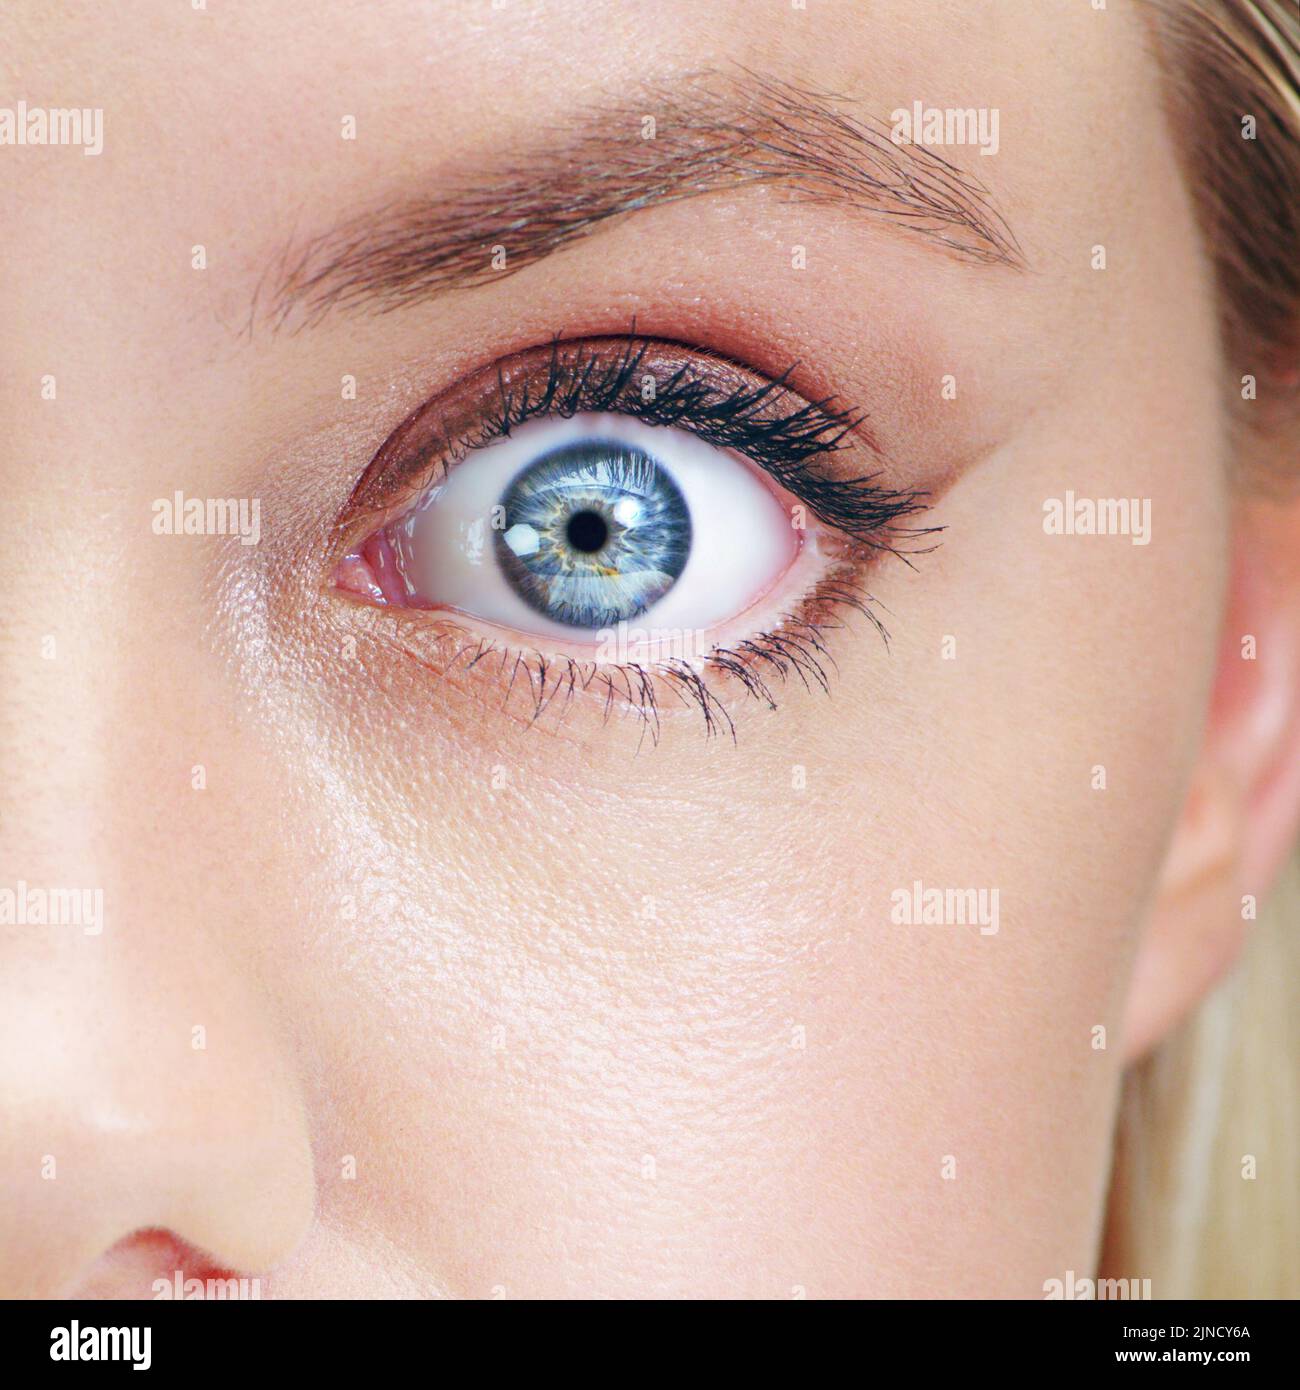 I cant believe what Im seeing. Closeup beauty shot of a young womans eye. Stock Photo